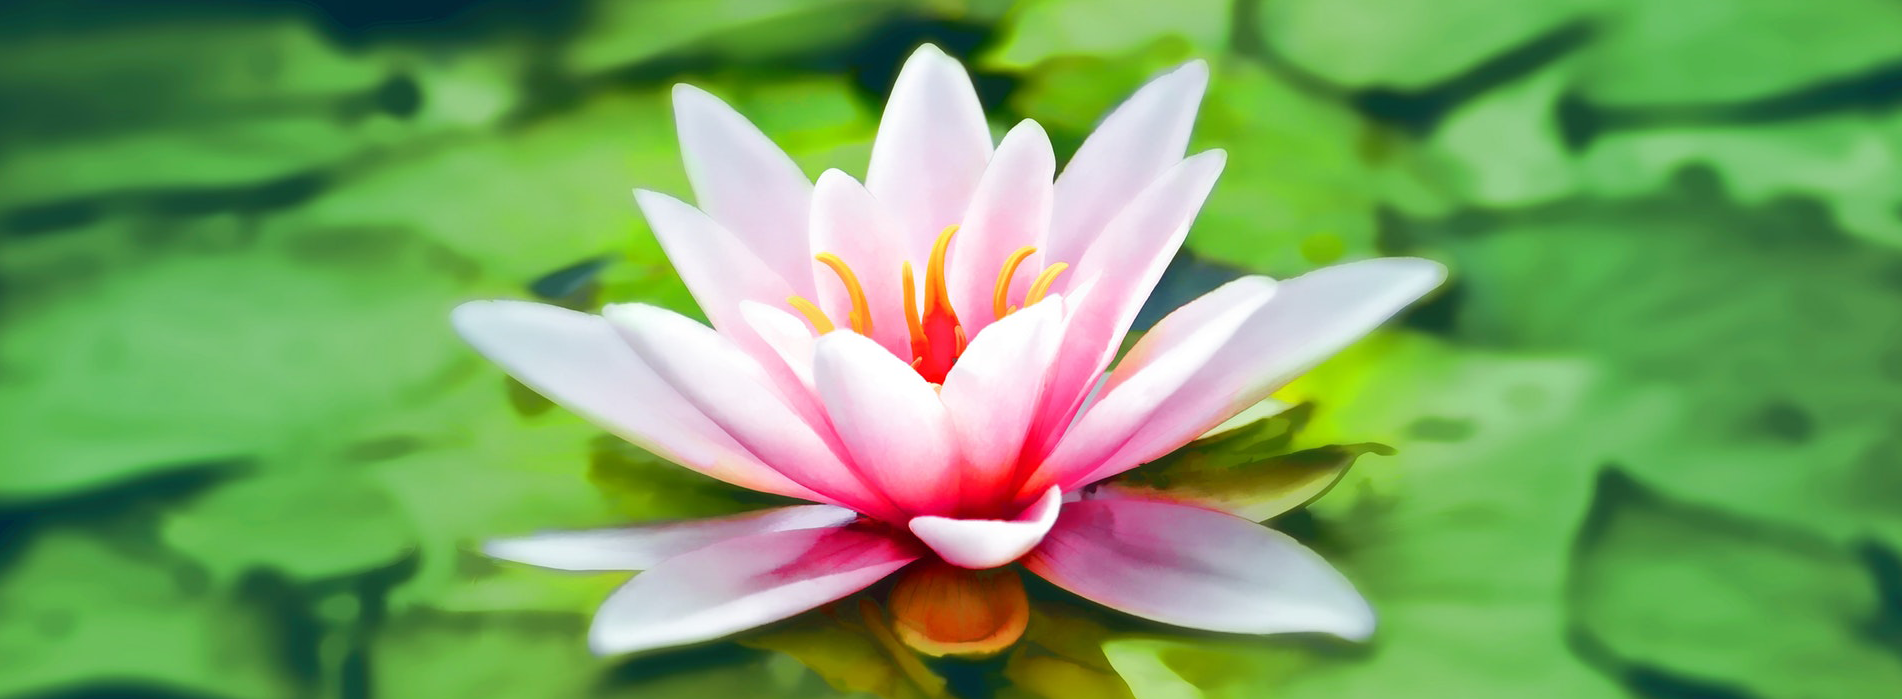 The Lotus Blossom method: ideation on steroids | by Phil Delalande ...